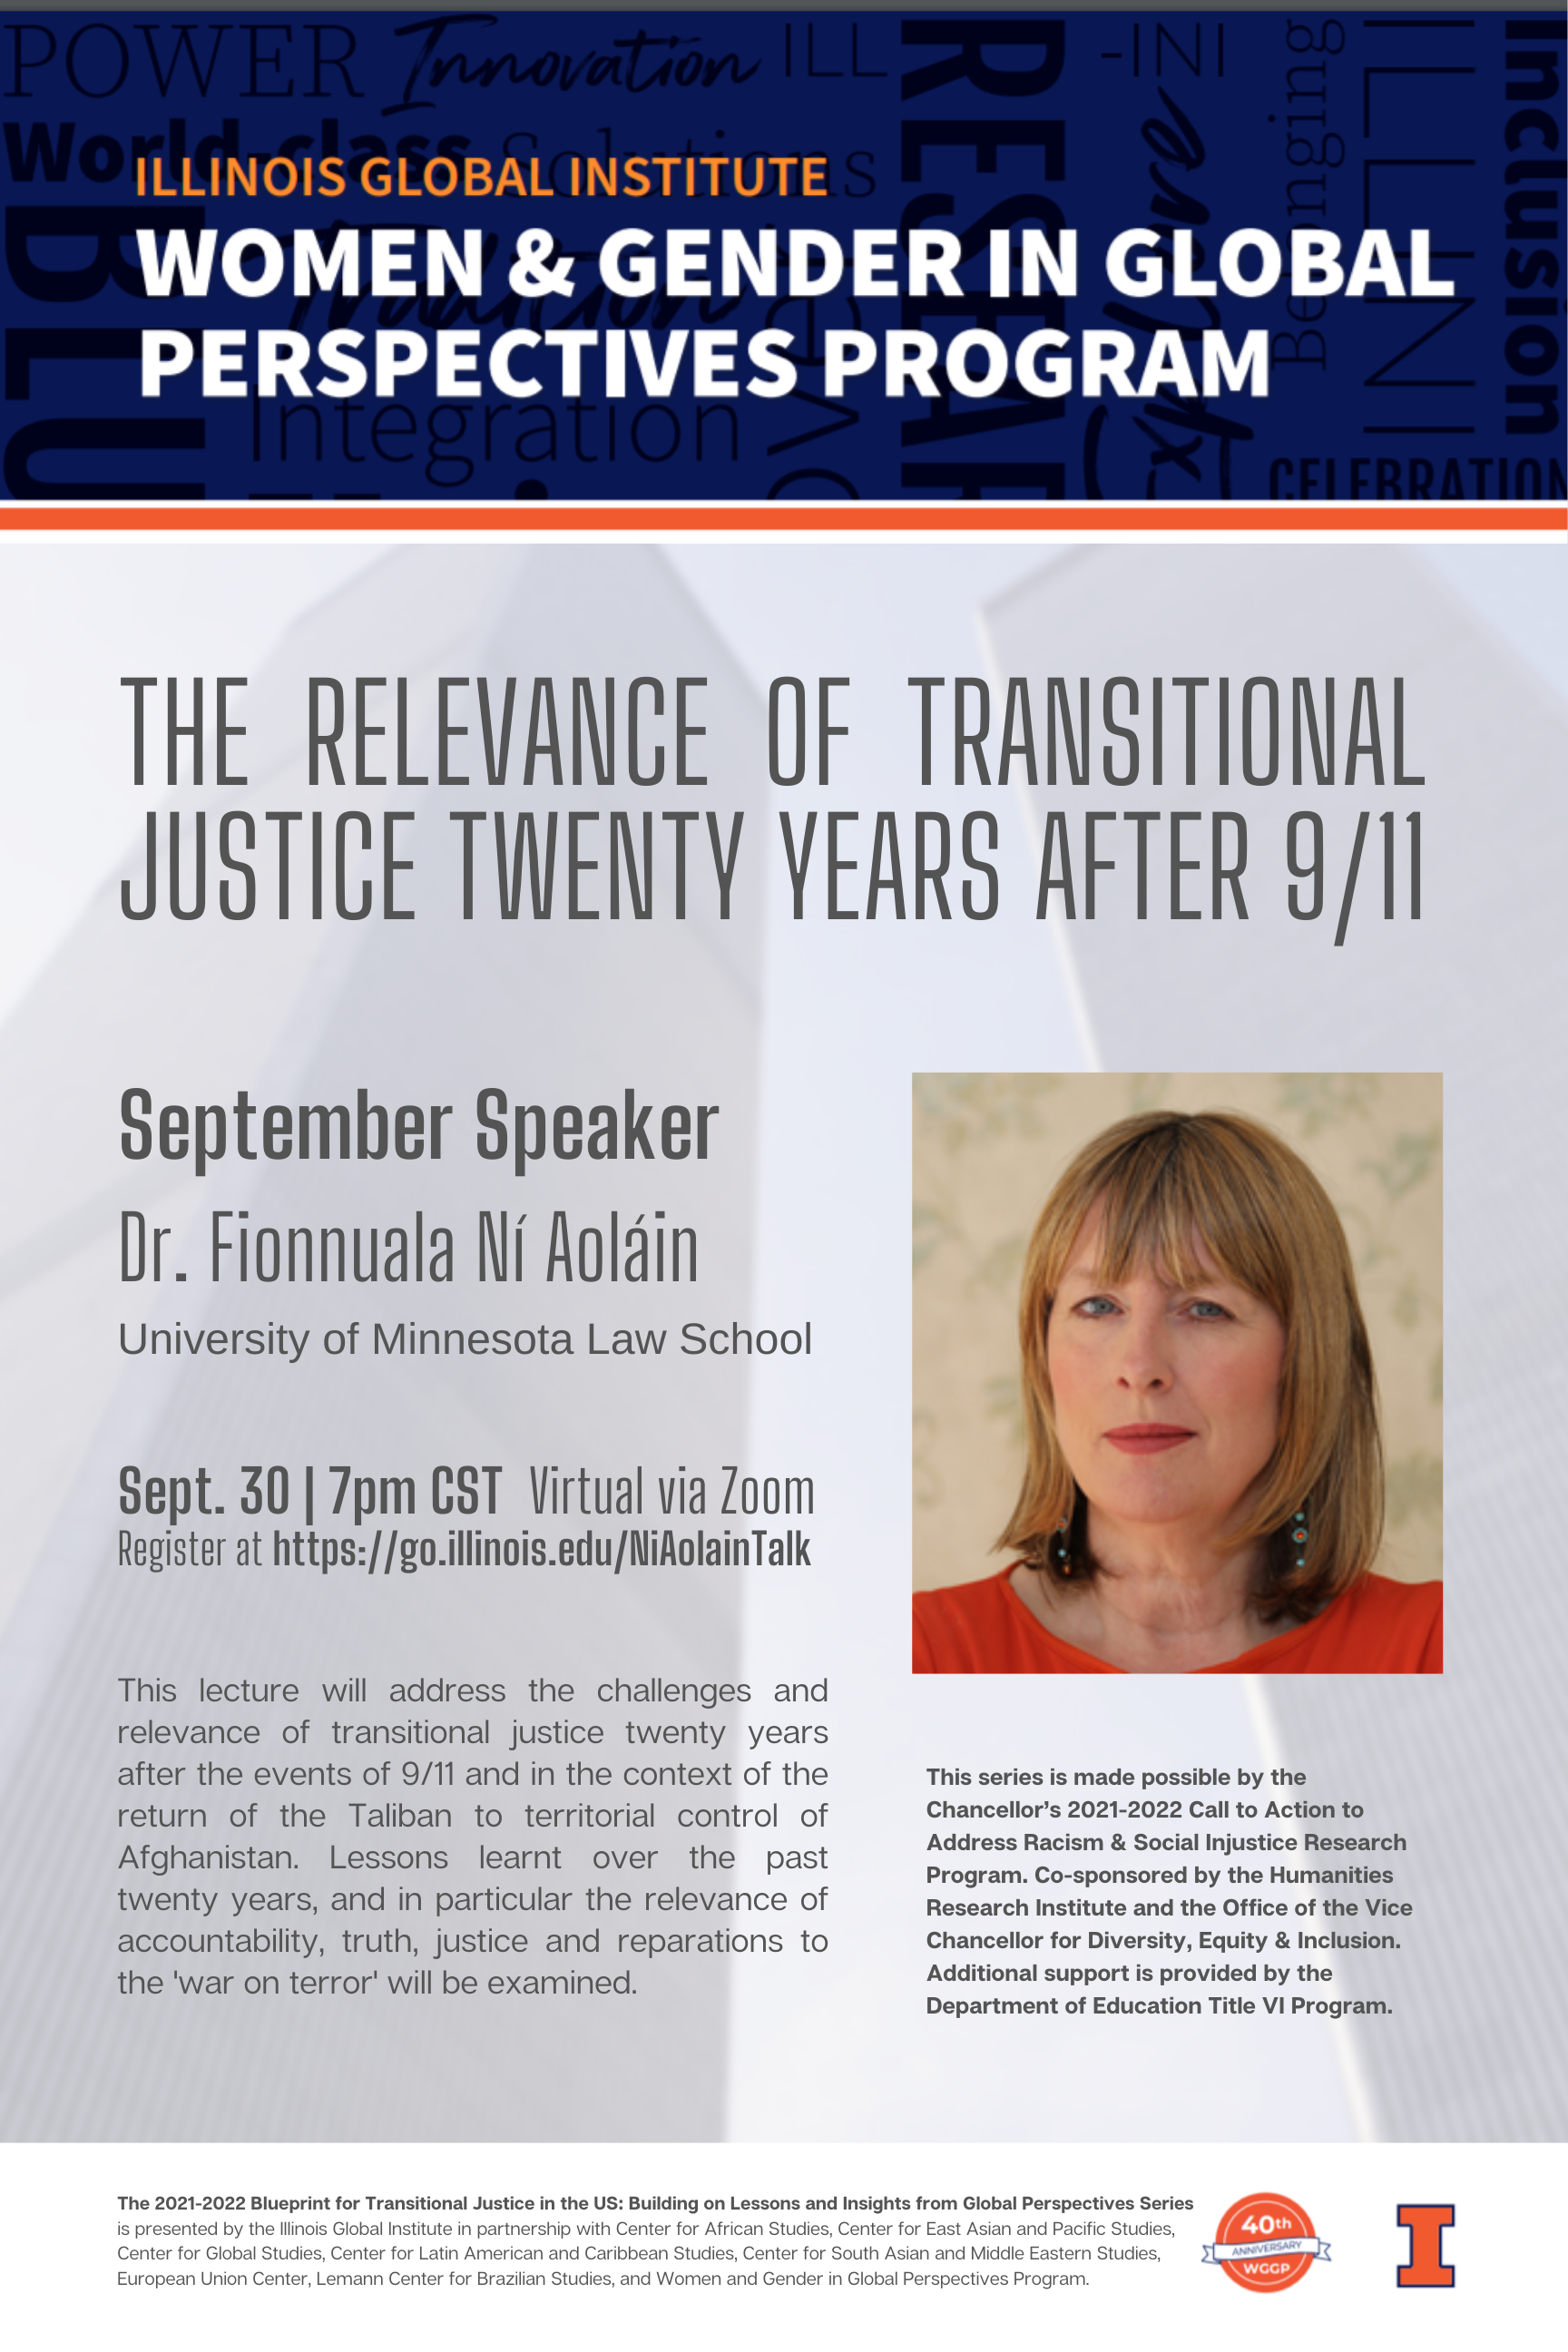 The Relevance of Transitional Justice Twenty Years after 9/11